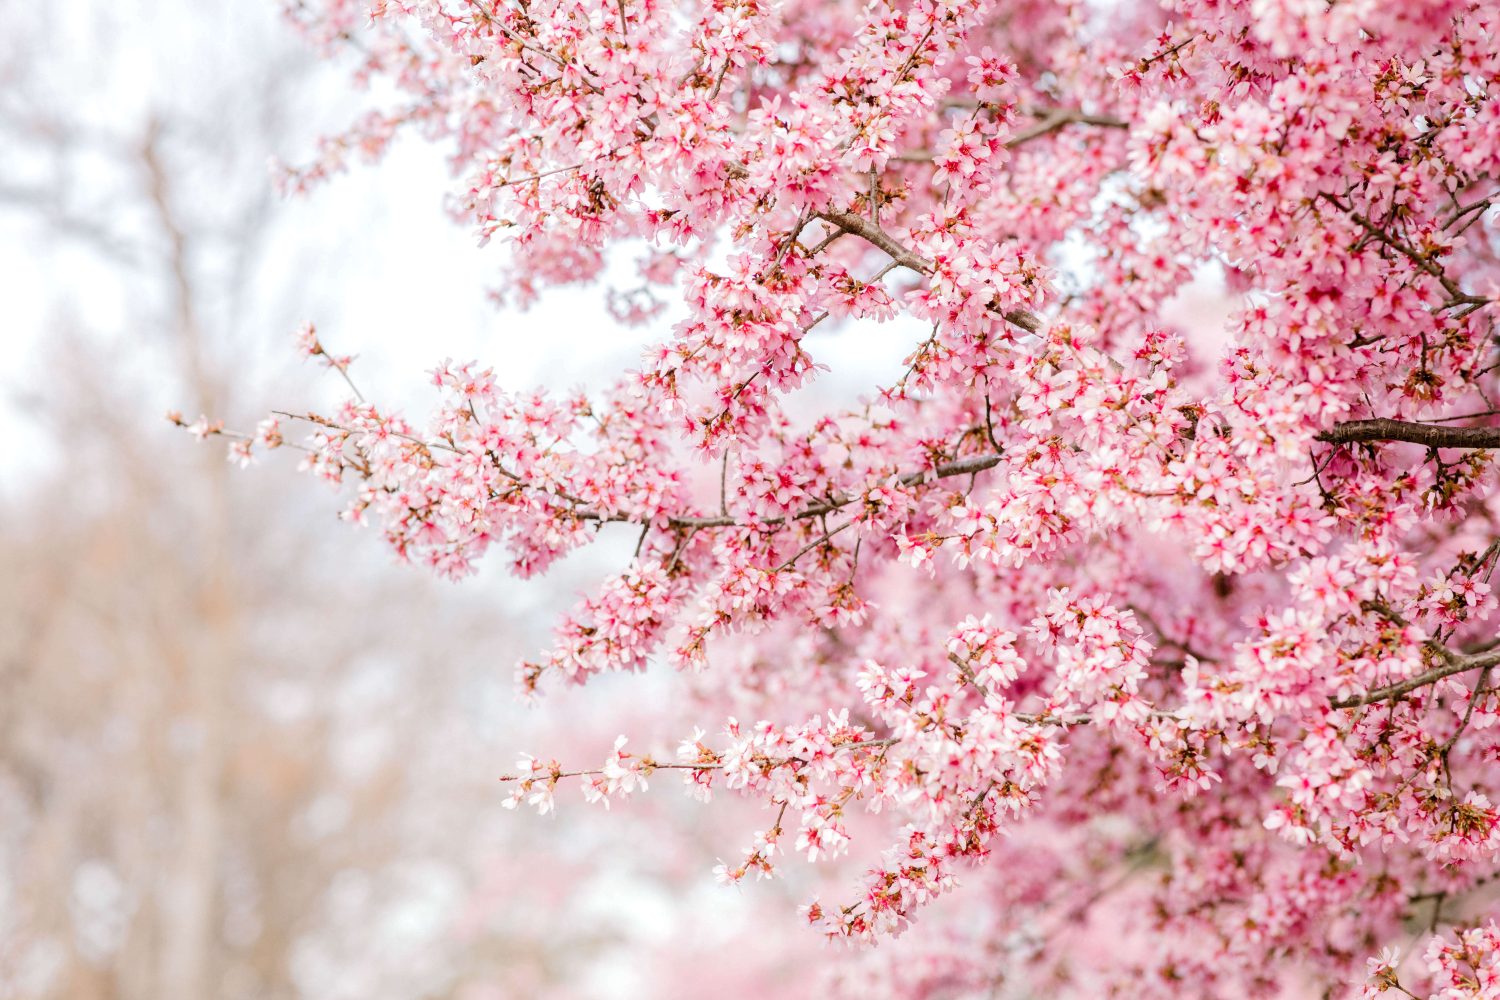 <p>One of the best places to see cherry blossoms in Dallas is the Dallas Arboretum. Here, over 150 cherry blossom trees bloom each spring.</p><p>Sharks, lions, alligators, and more! Don’t miss today’s latest and most exciting animal news. <strong><a href="https://www.msn.com/en-us/channel/source/AZ%20Animals%20US/sr-vid-7etr9q8xun6k6508c3nufaum0de3dqktiq6h27ddeagnfug30wka">Click here to access the A-Z Animals profile page</a> and be sure to hit the <em>Follow</em> button here or at the top of this article!</strong></p> <p>Have feedback? Add a comment below!</p>